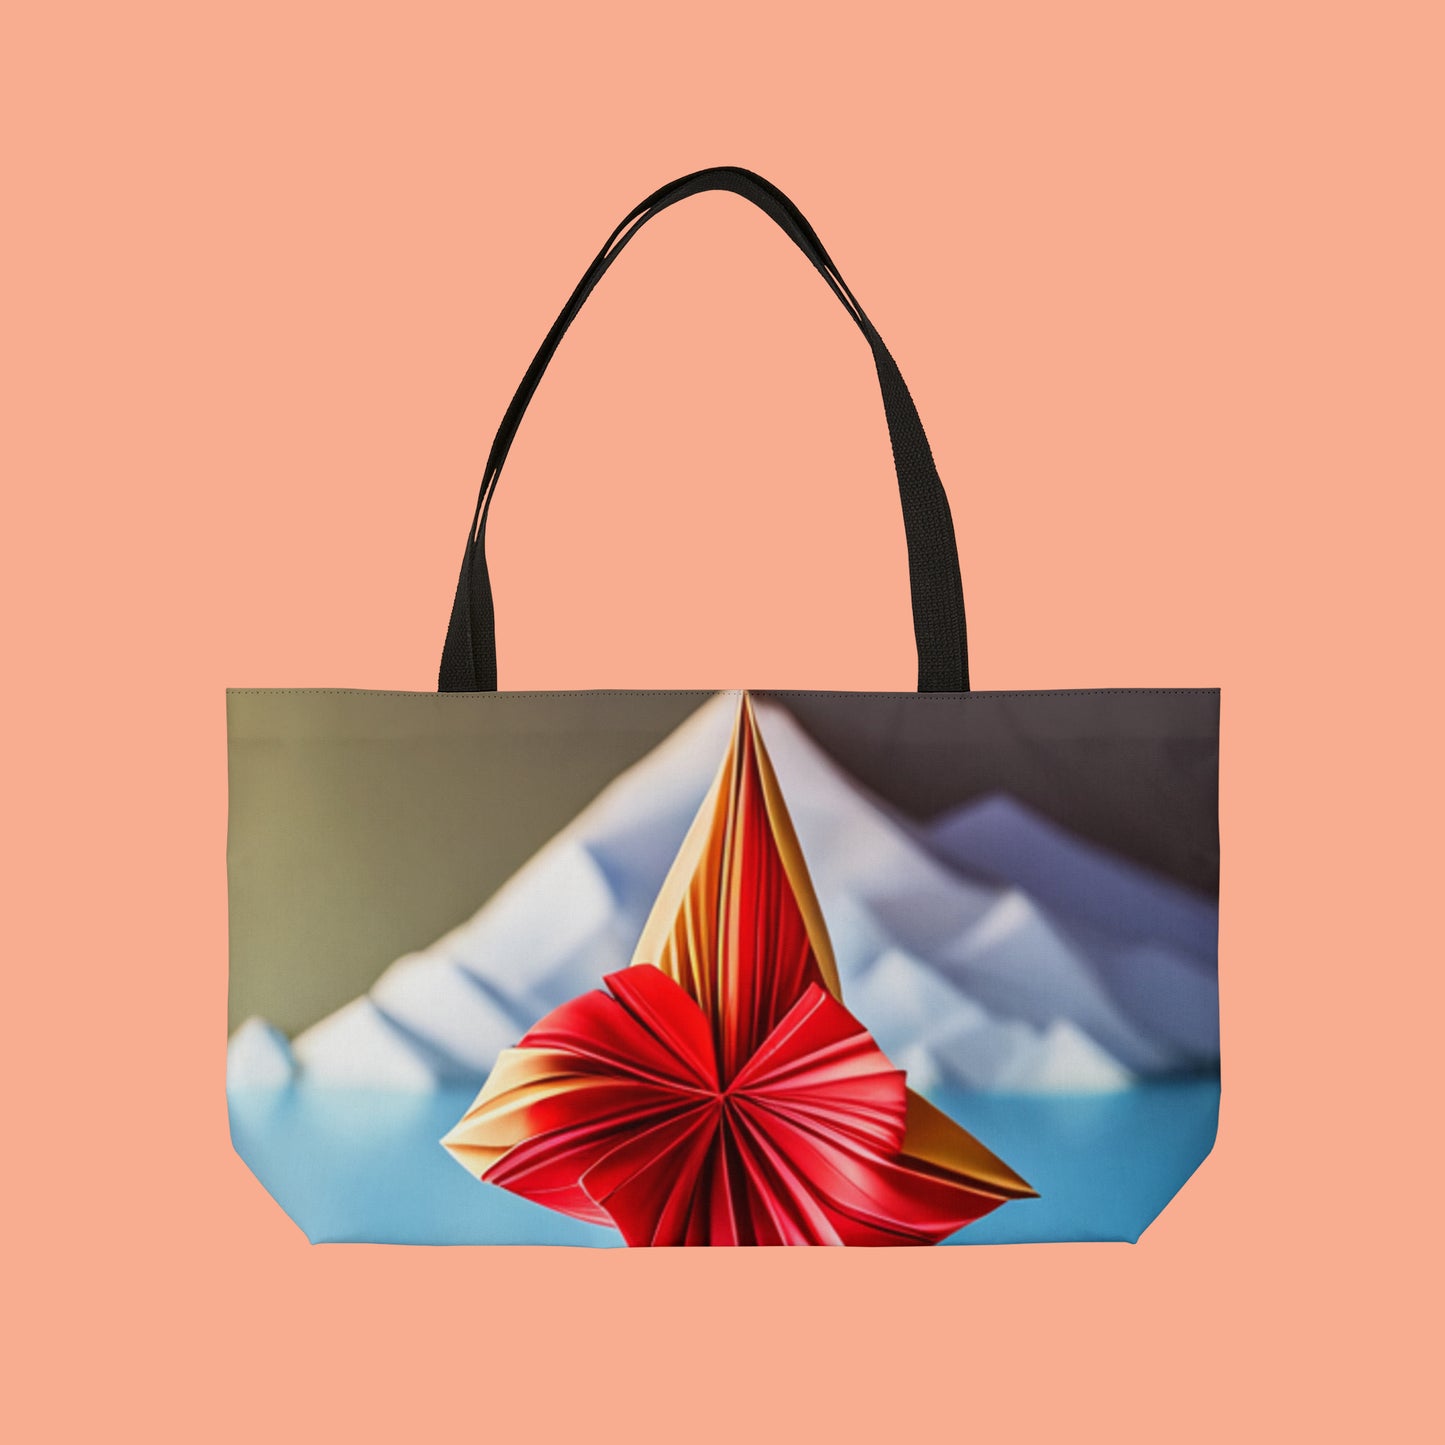 Amaryllis and Origami inspired style design on this Weekender Tote Bag.